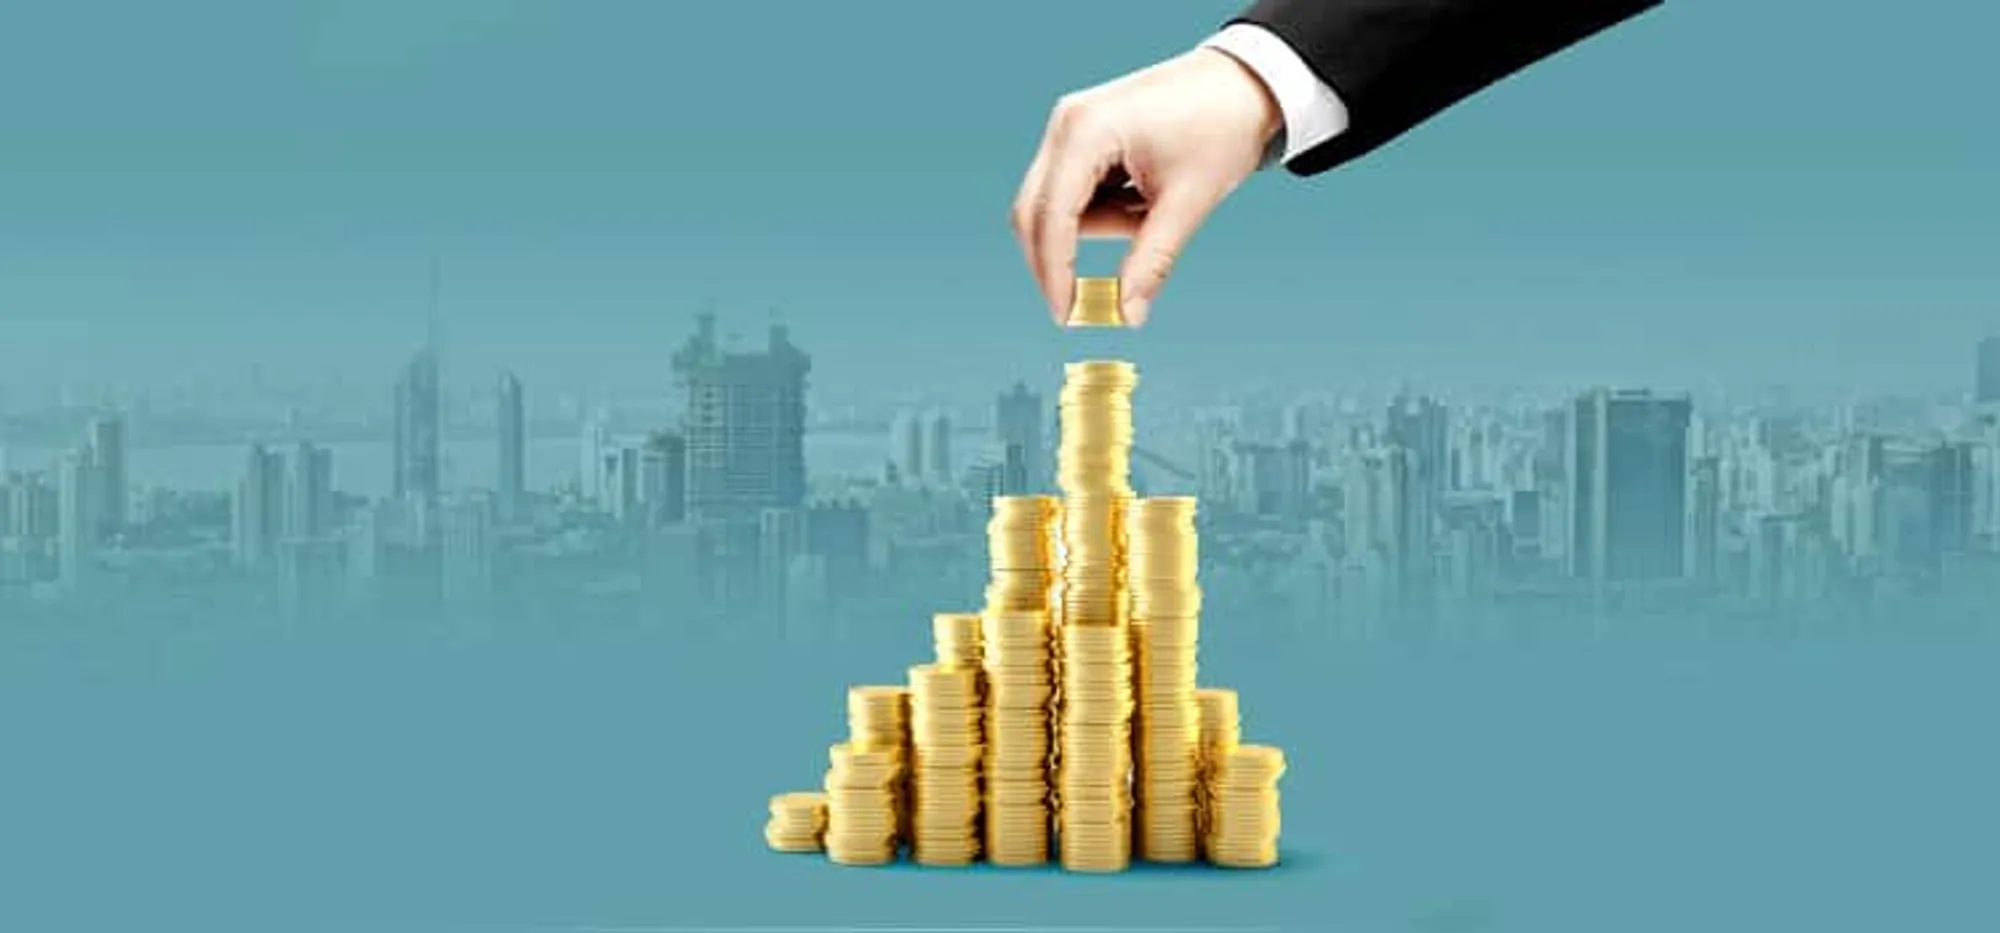 Reasons for Investing in Indian Real Estate